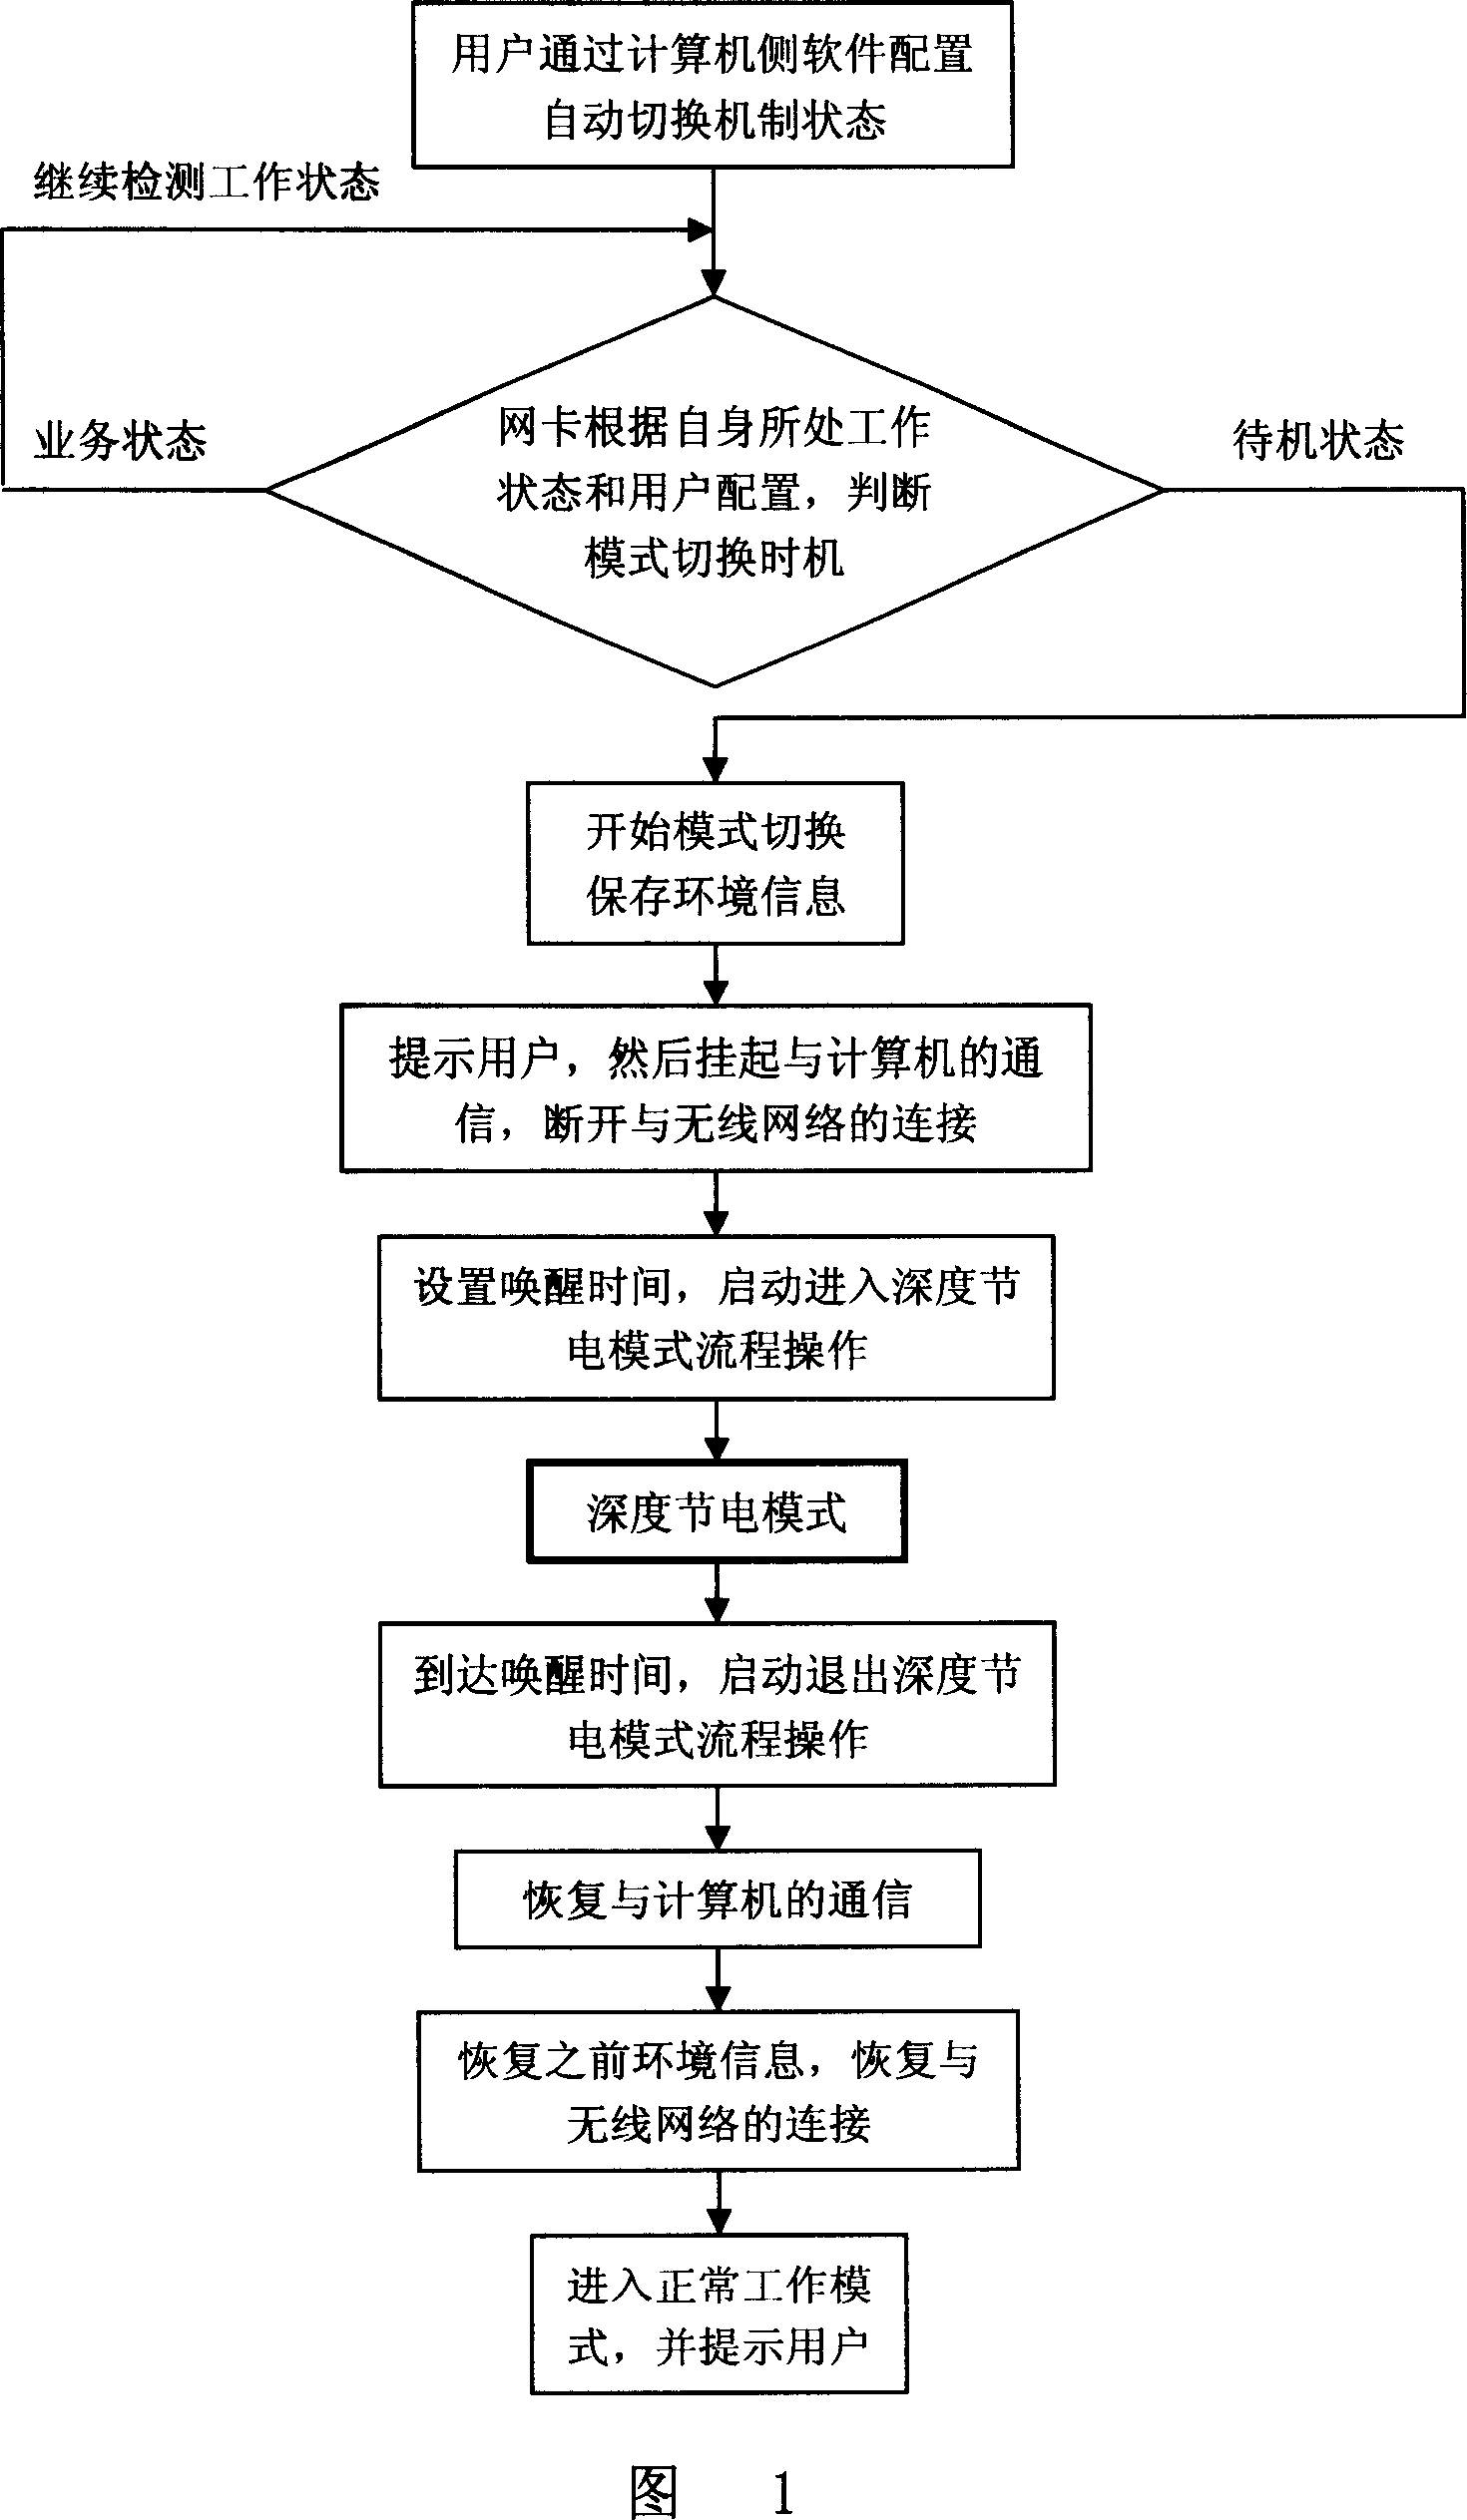 Method for reducing power consumption of wireless network interface card